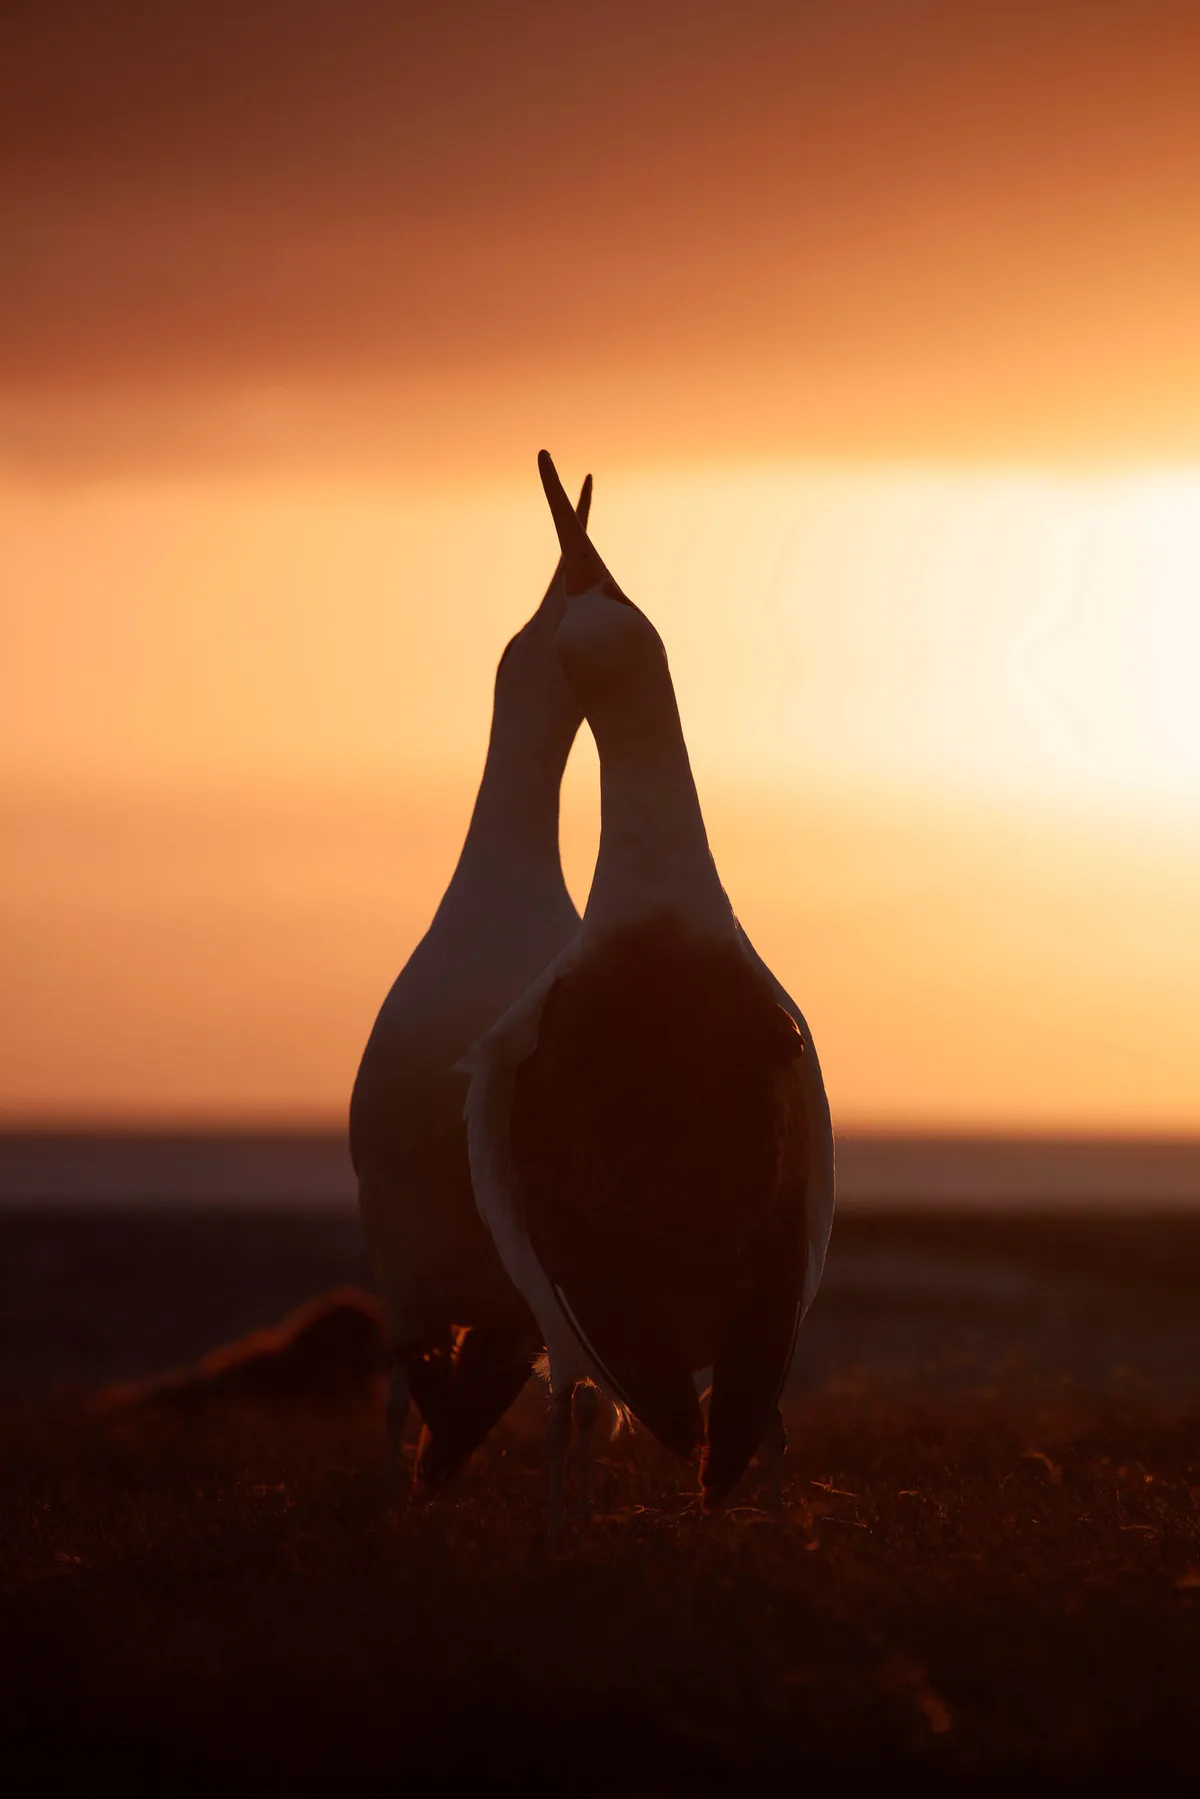 A pair of albatrosses are silhouetted against an orange sky, pointing their beaks upwards together.